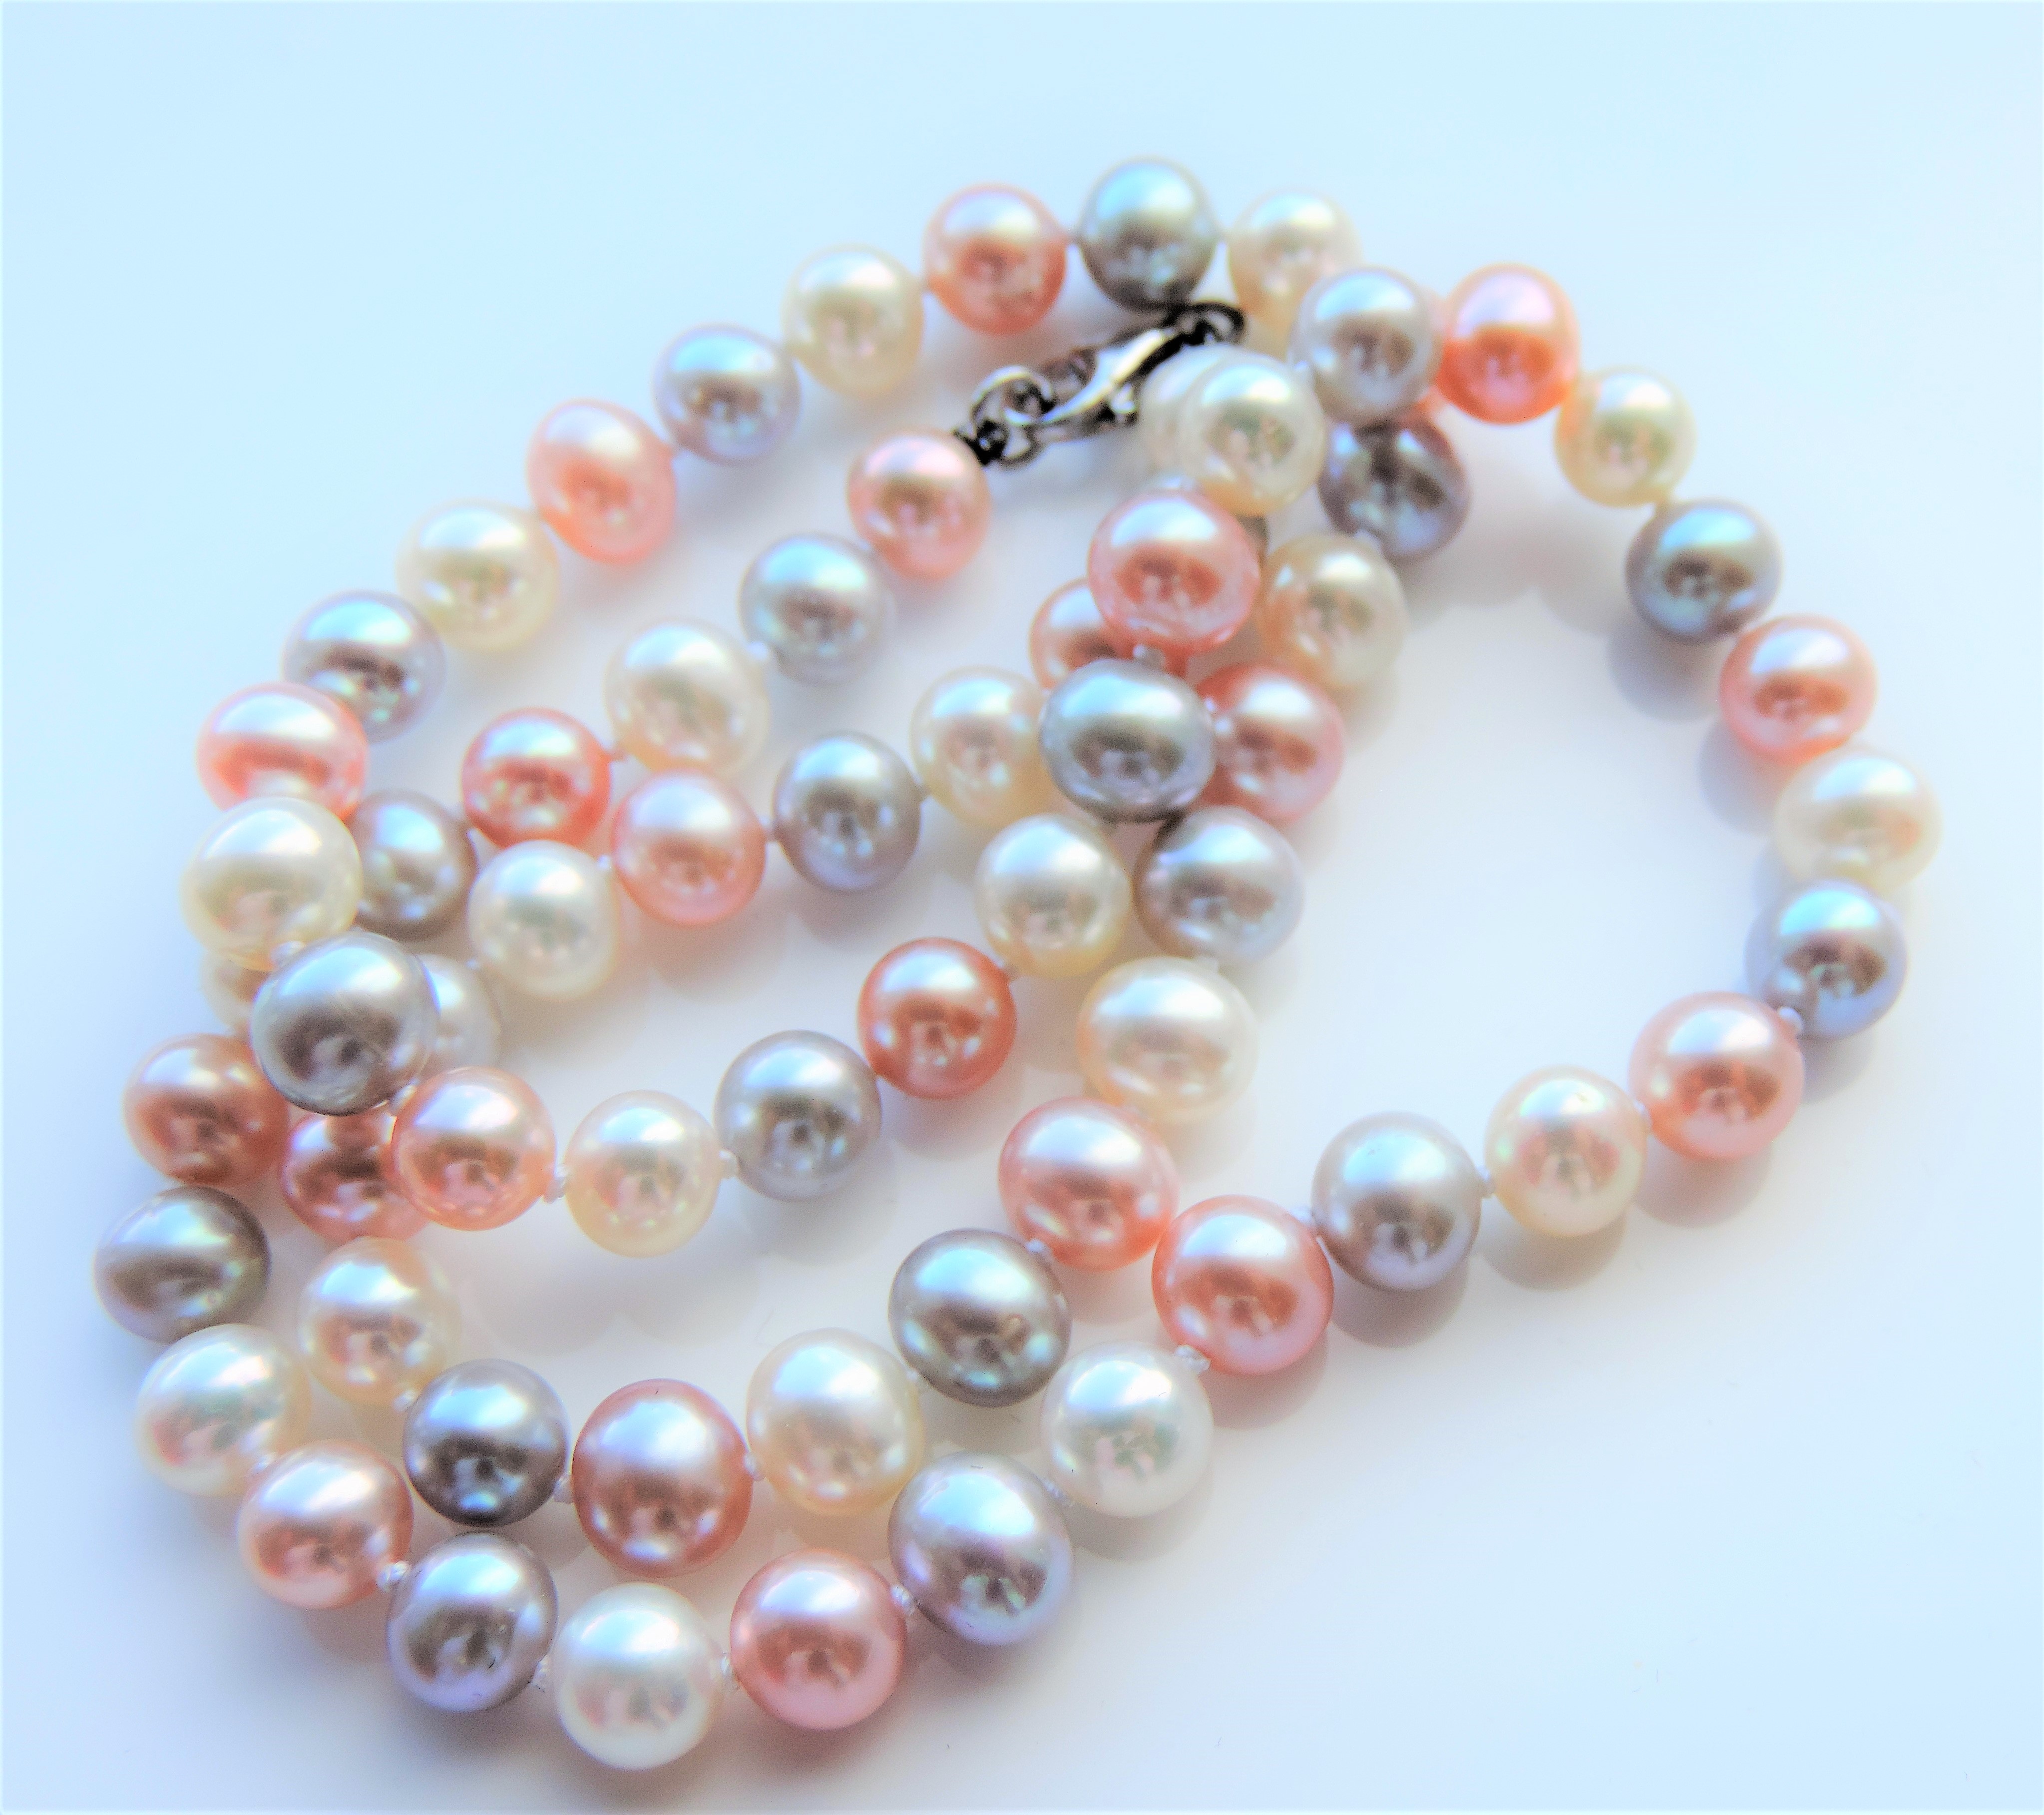 Luxury Freshwater Multicolour Cultured Pearl Necklace - Image 2 of 5